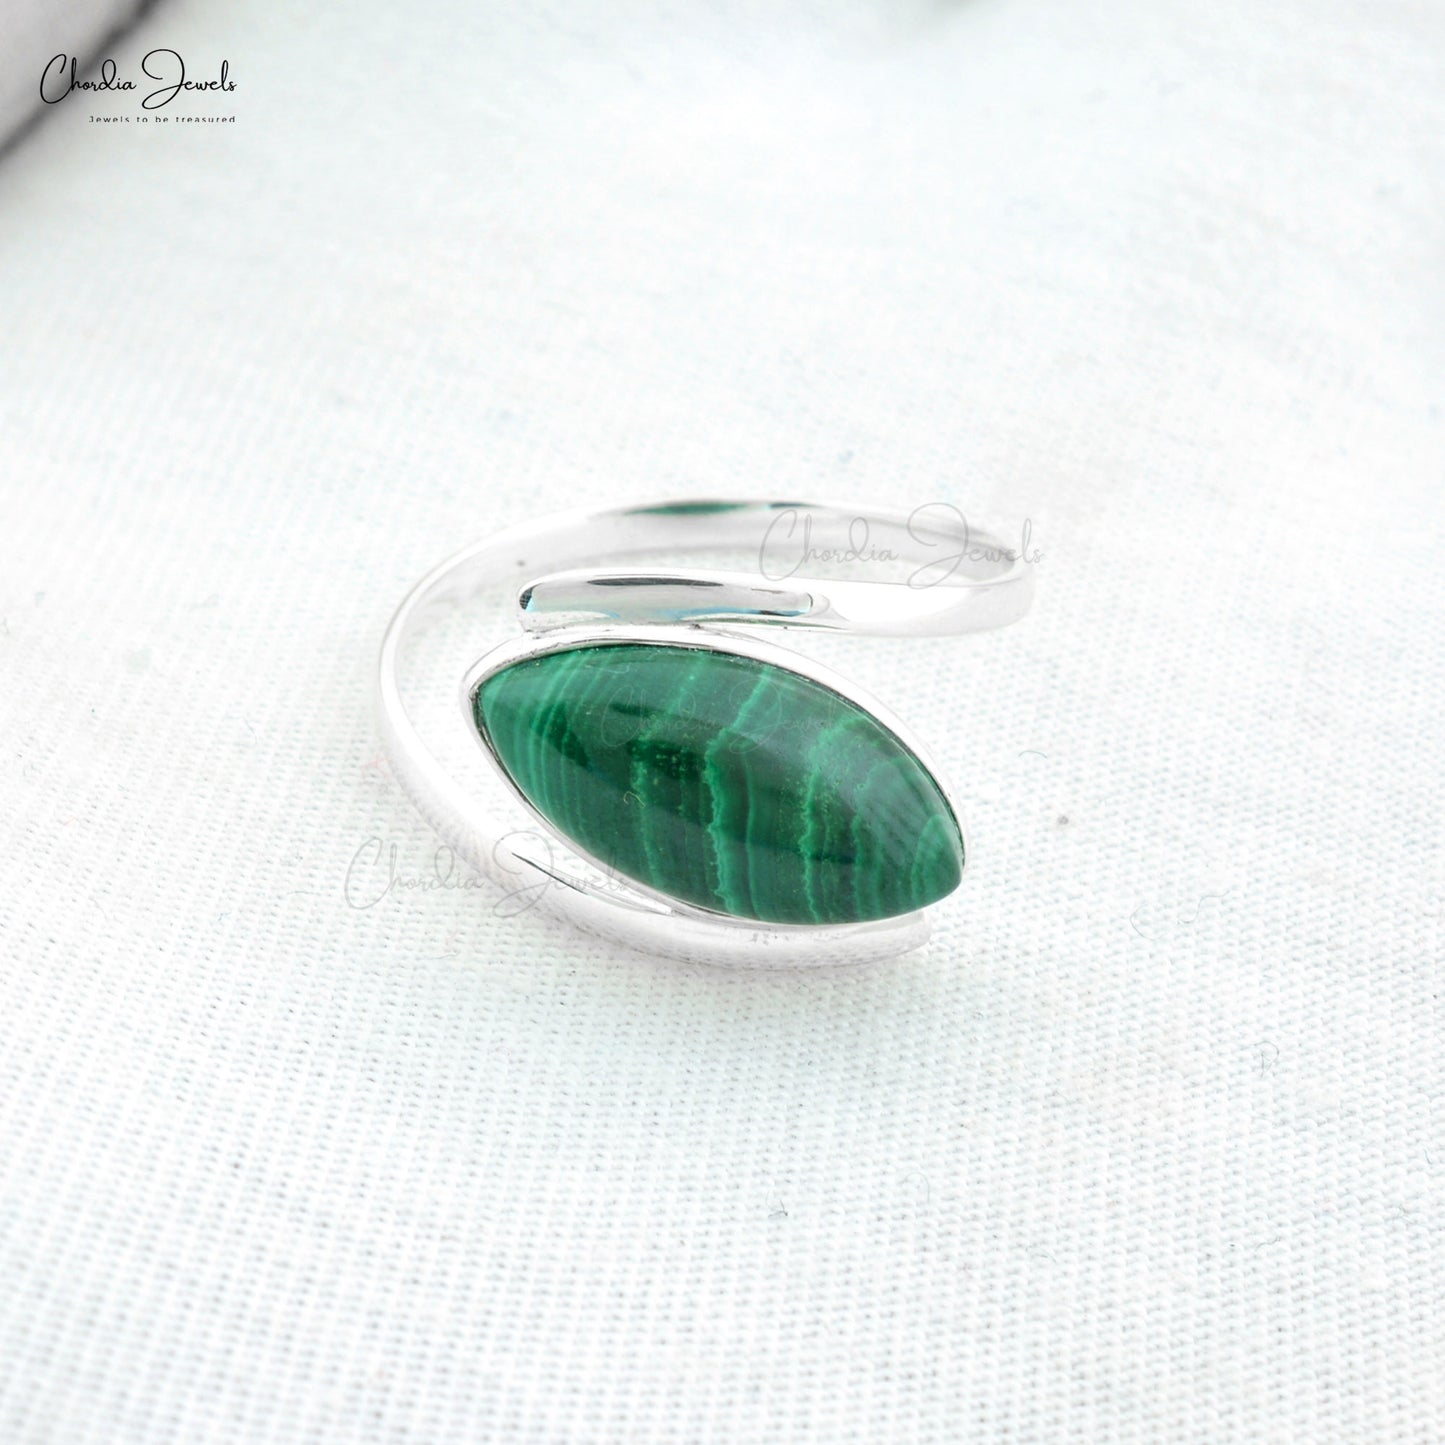 Load image into Gallery viewer, Fine Quality Jewelry 925 Sterling Silver Solitaire Ring with Malachite Marquise Bezel Set At Offer Price
